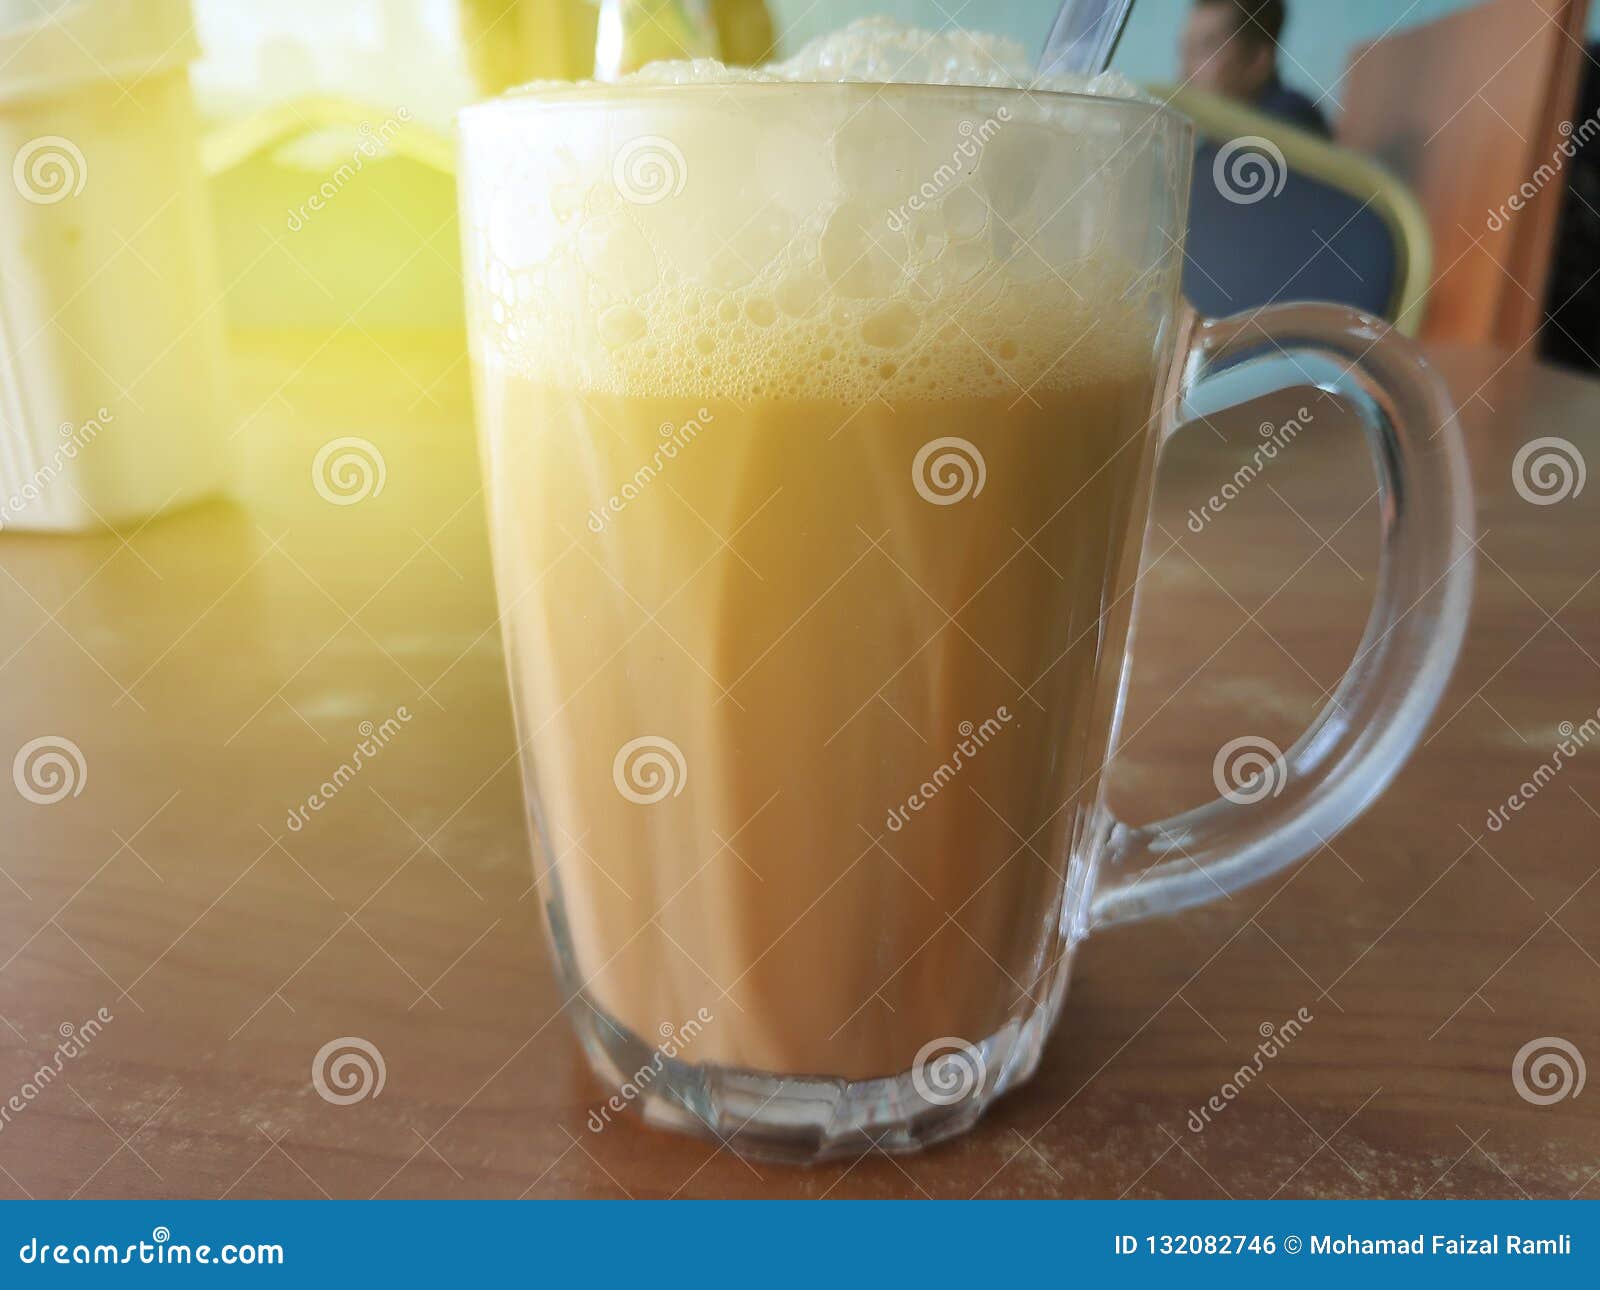 selective focus of tea with milk in a mug or popularly known as teh tarik in malay language.